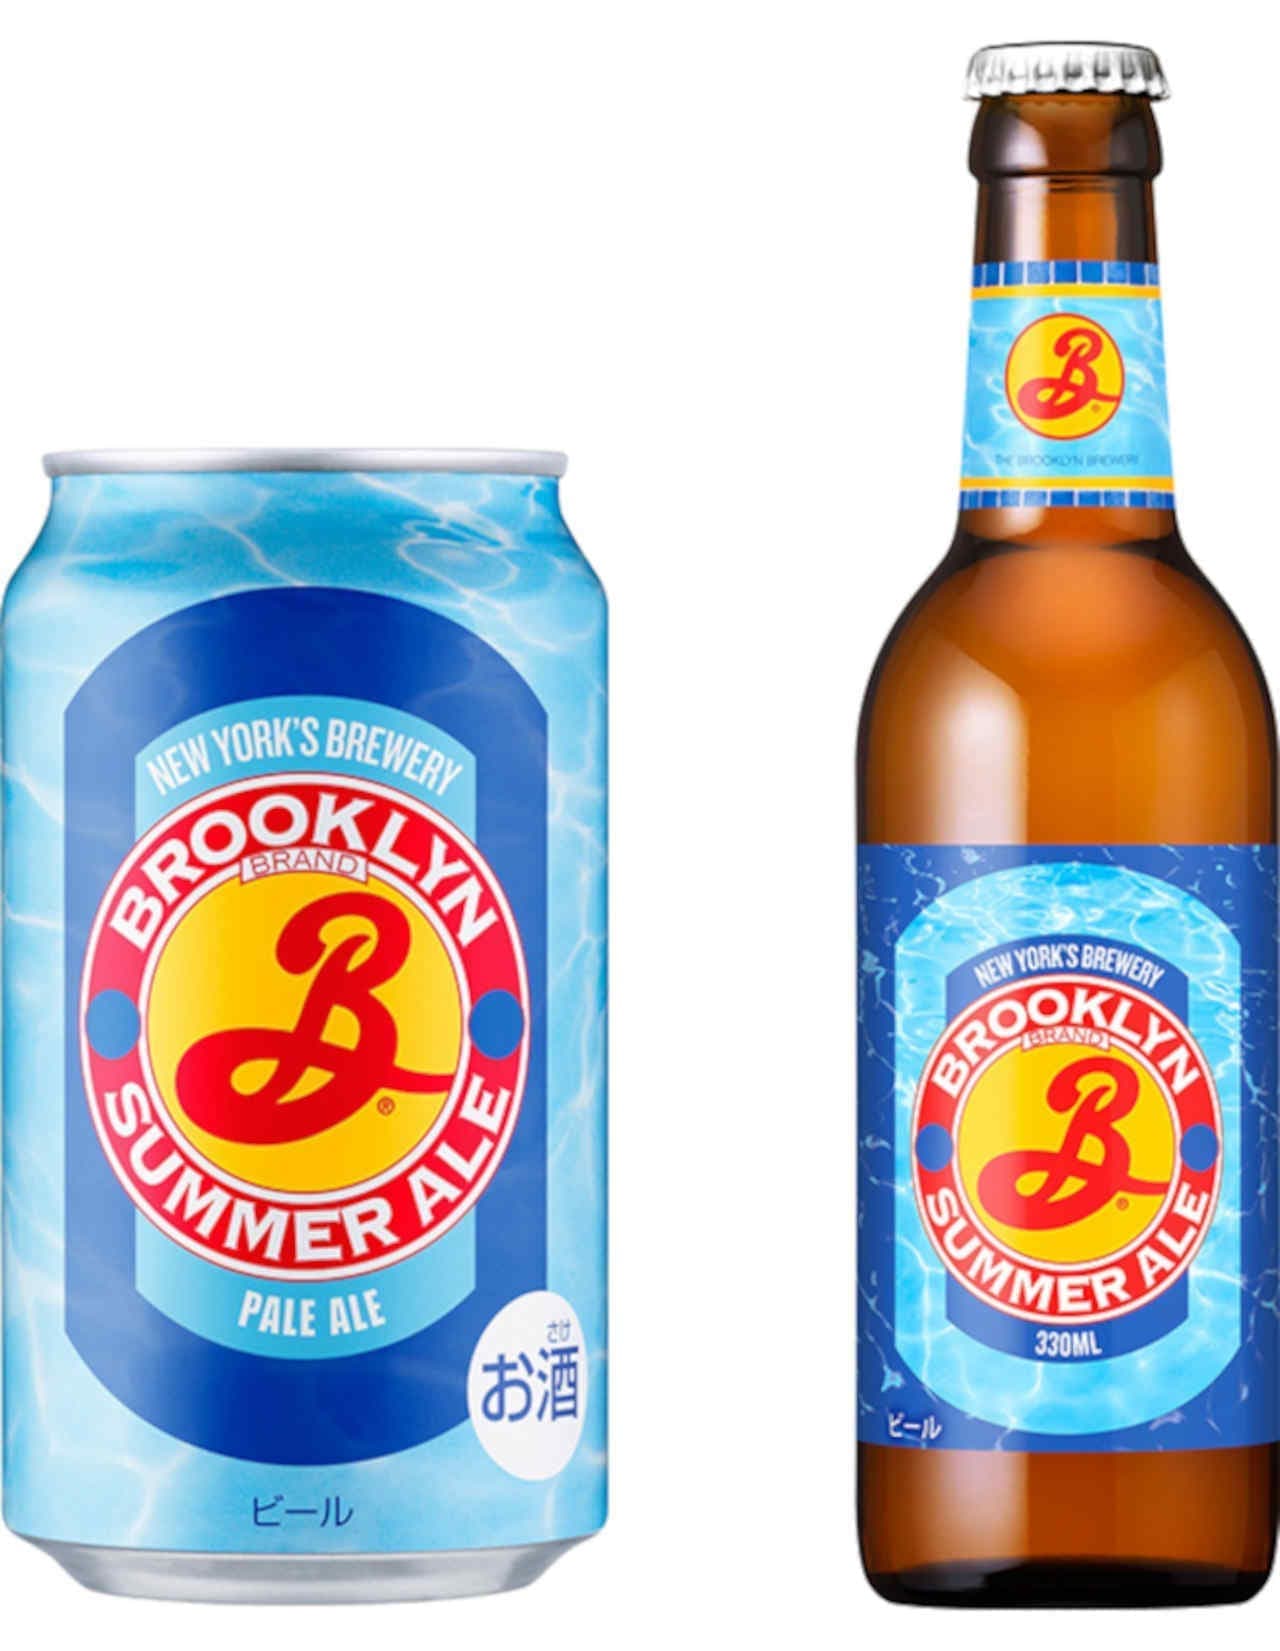 JAPANESE CROWN JAPAN BEER BOTTLE CAP Details about   BROOKLYN  SUMMER  ALE FOR COLLECTOR 